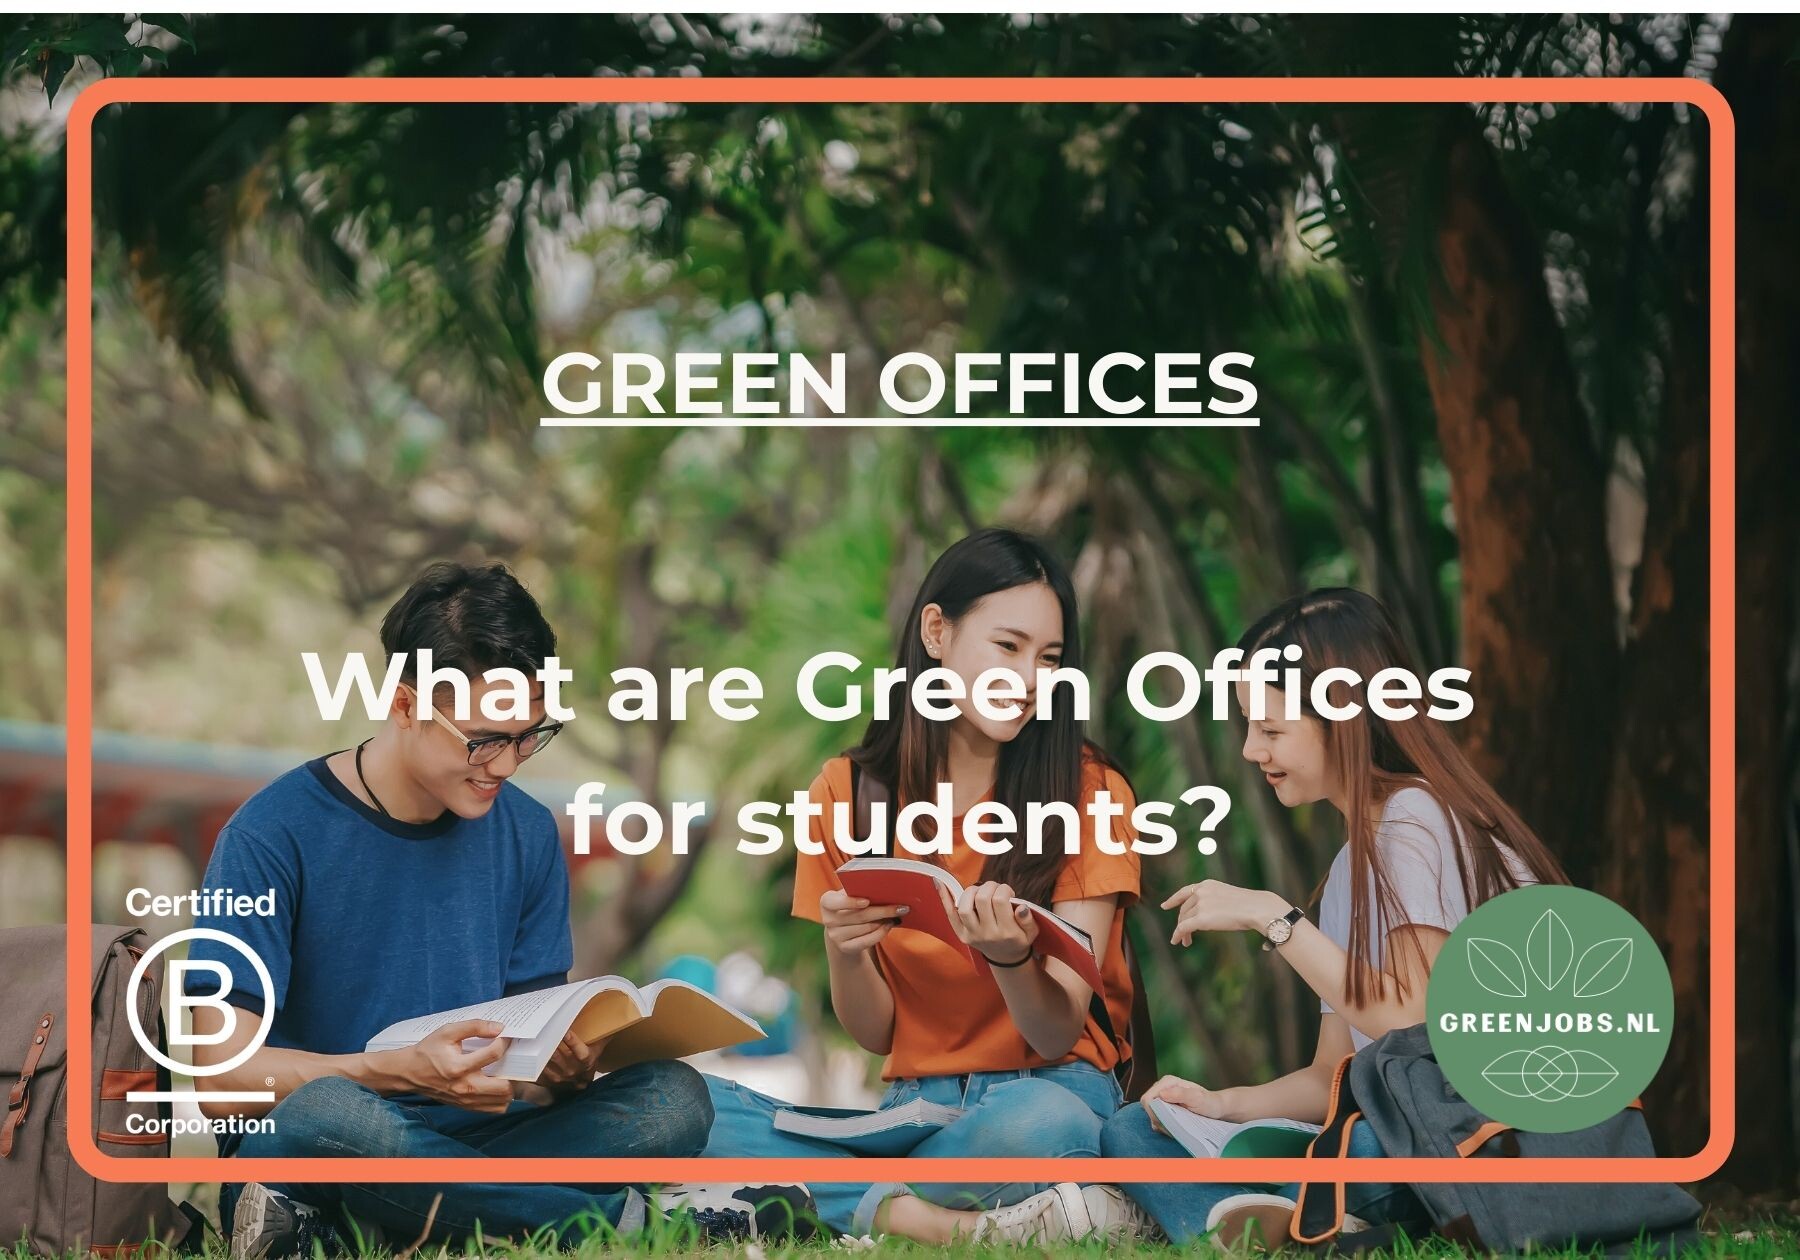 What are Green Offices for students?